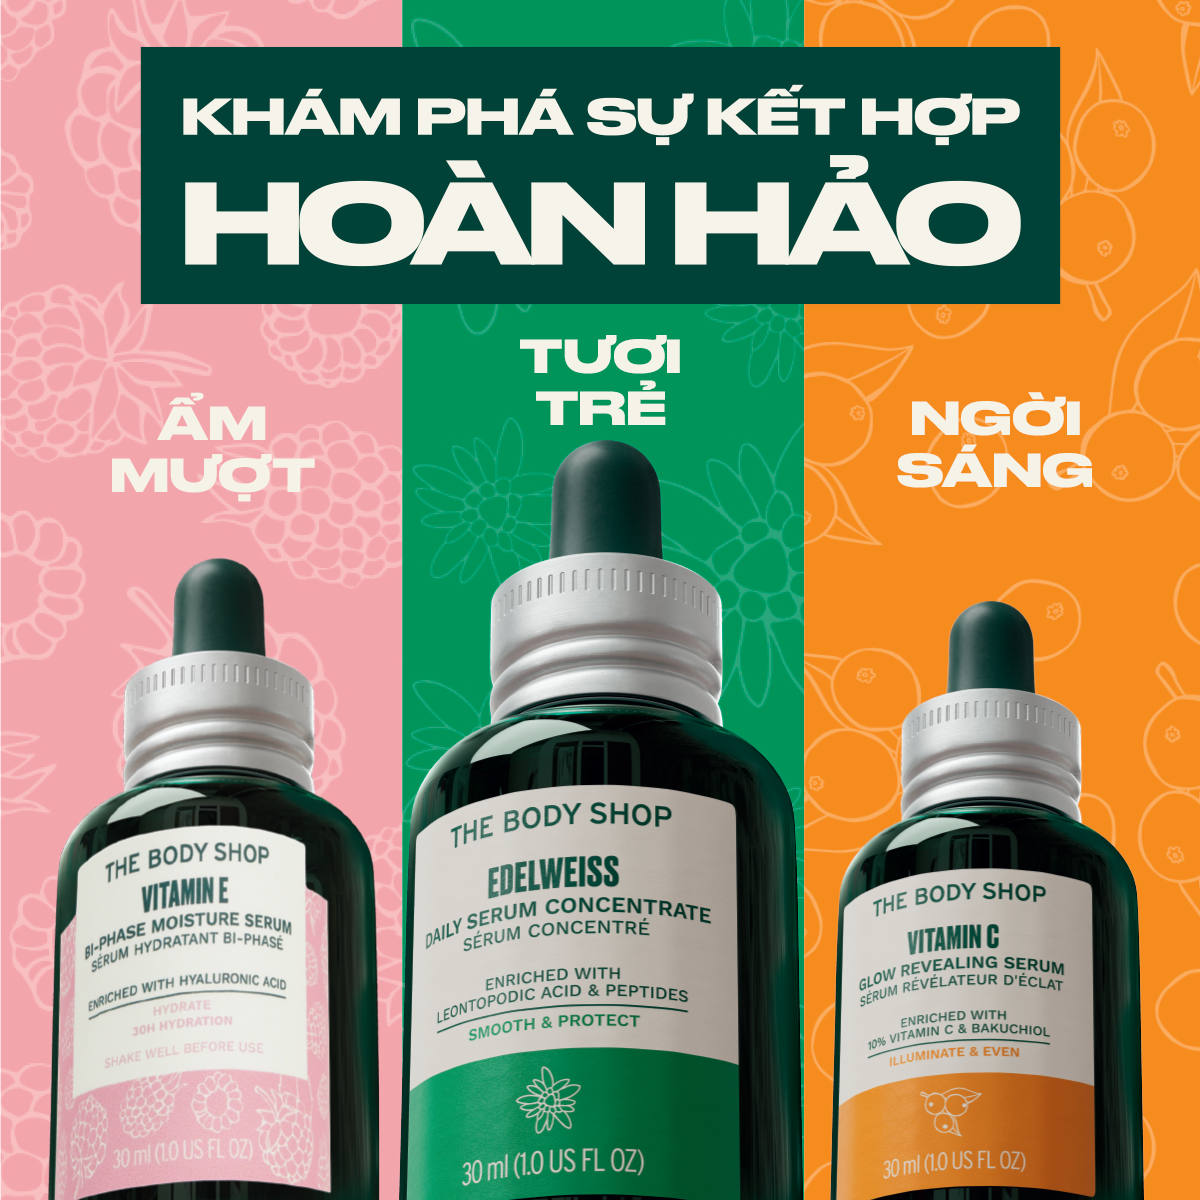 LET’S GLOW WITH OUR 3 BEST TRIO OF SERUMS FROM THE BODY SHOP